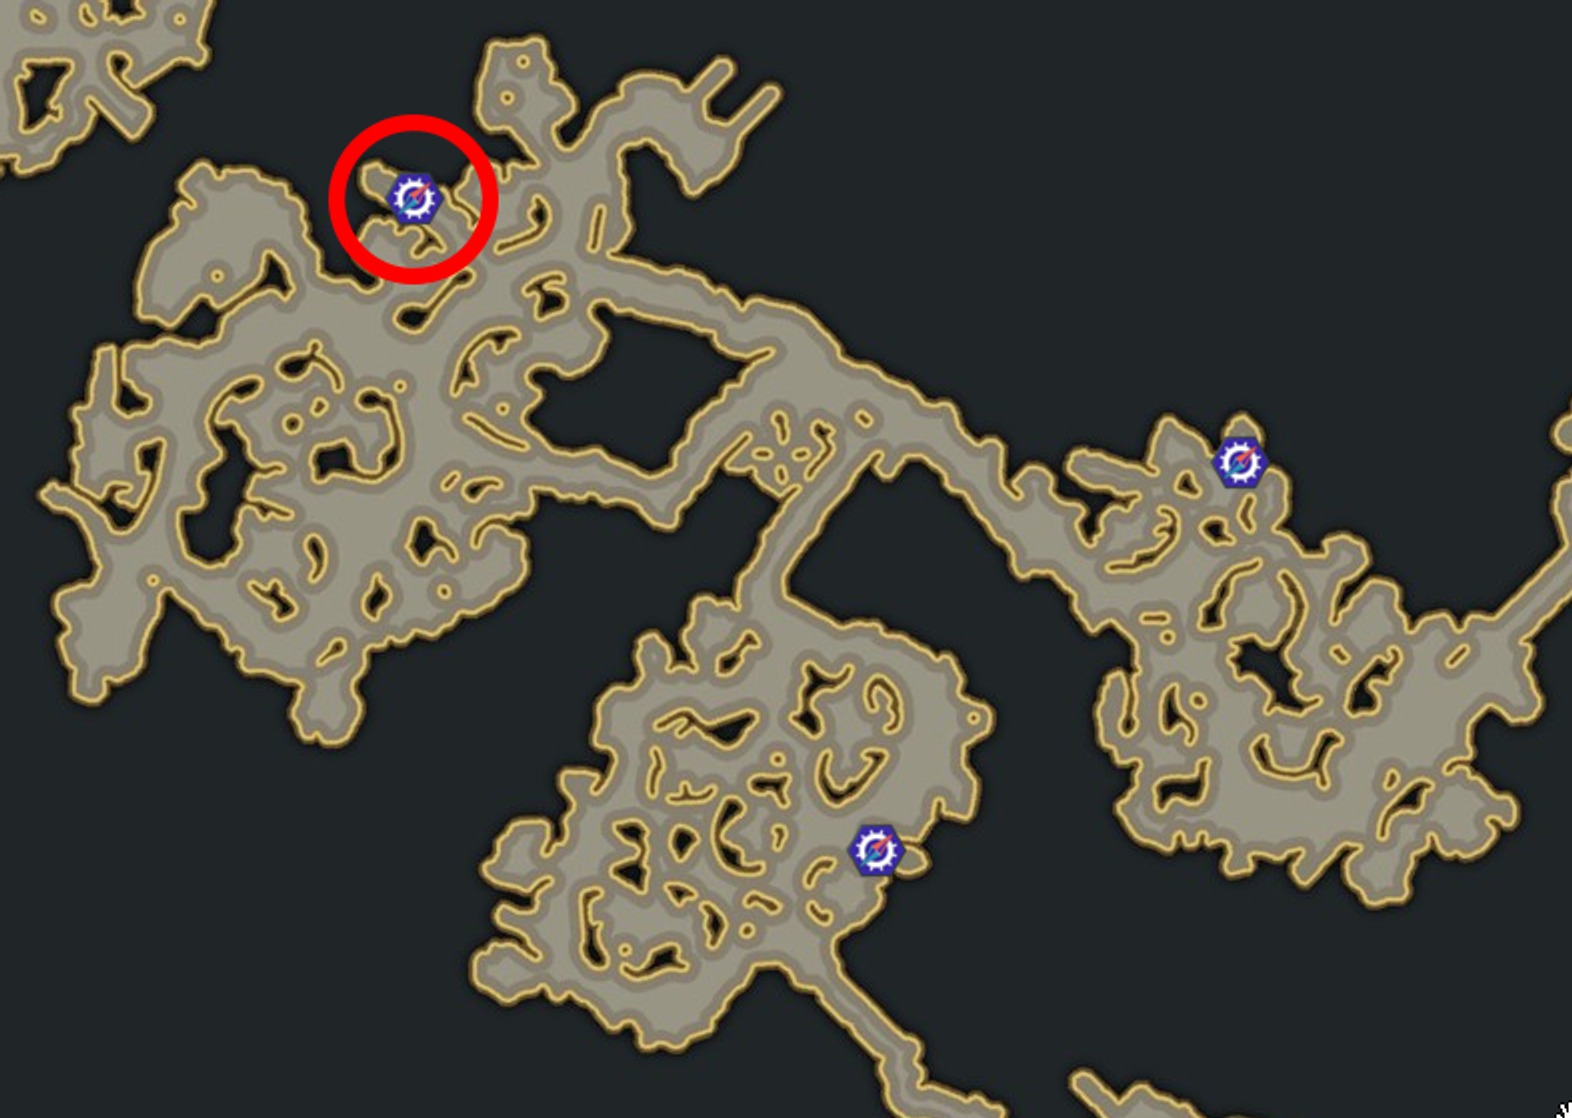 verger-daliants-lost-ark-map-emplacement